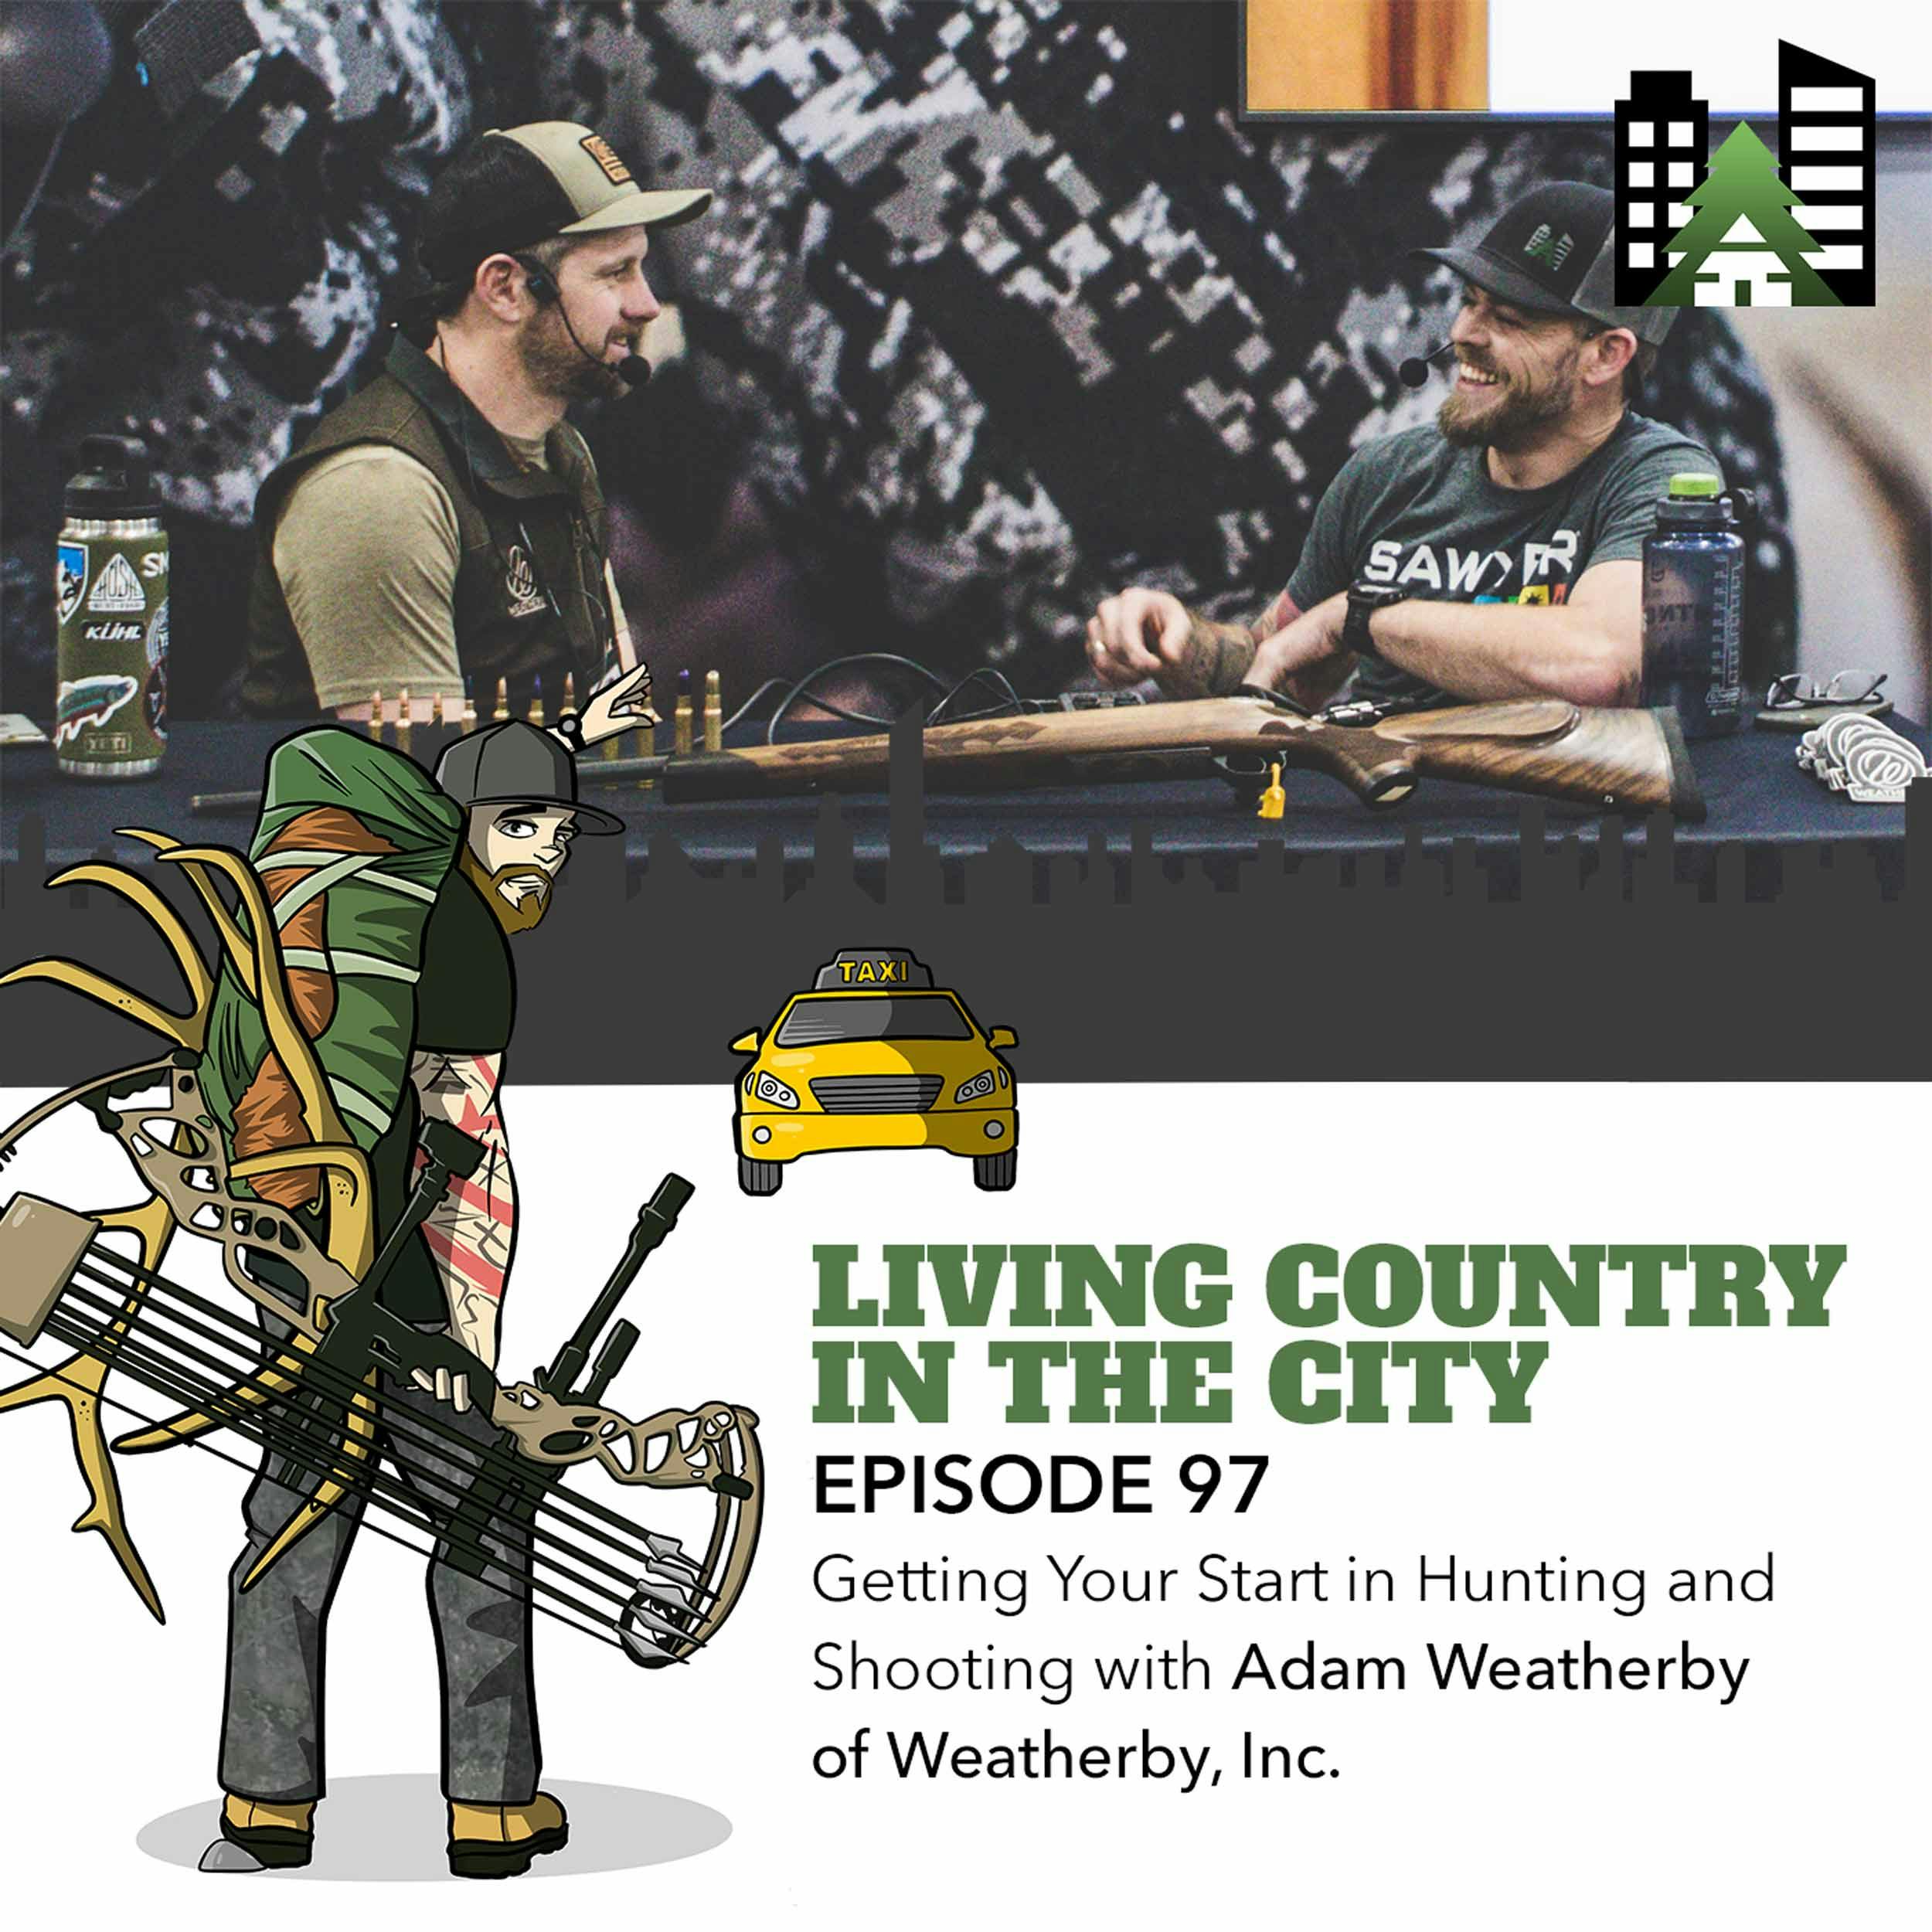 Ep 97 - Getting Your Start in Hunting and Shooting with Adam Weatherby of Weatherby, Inc.